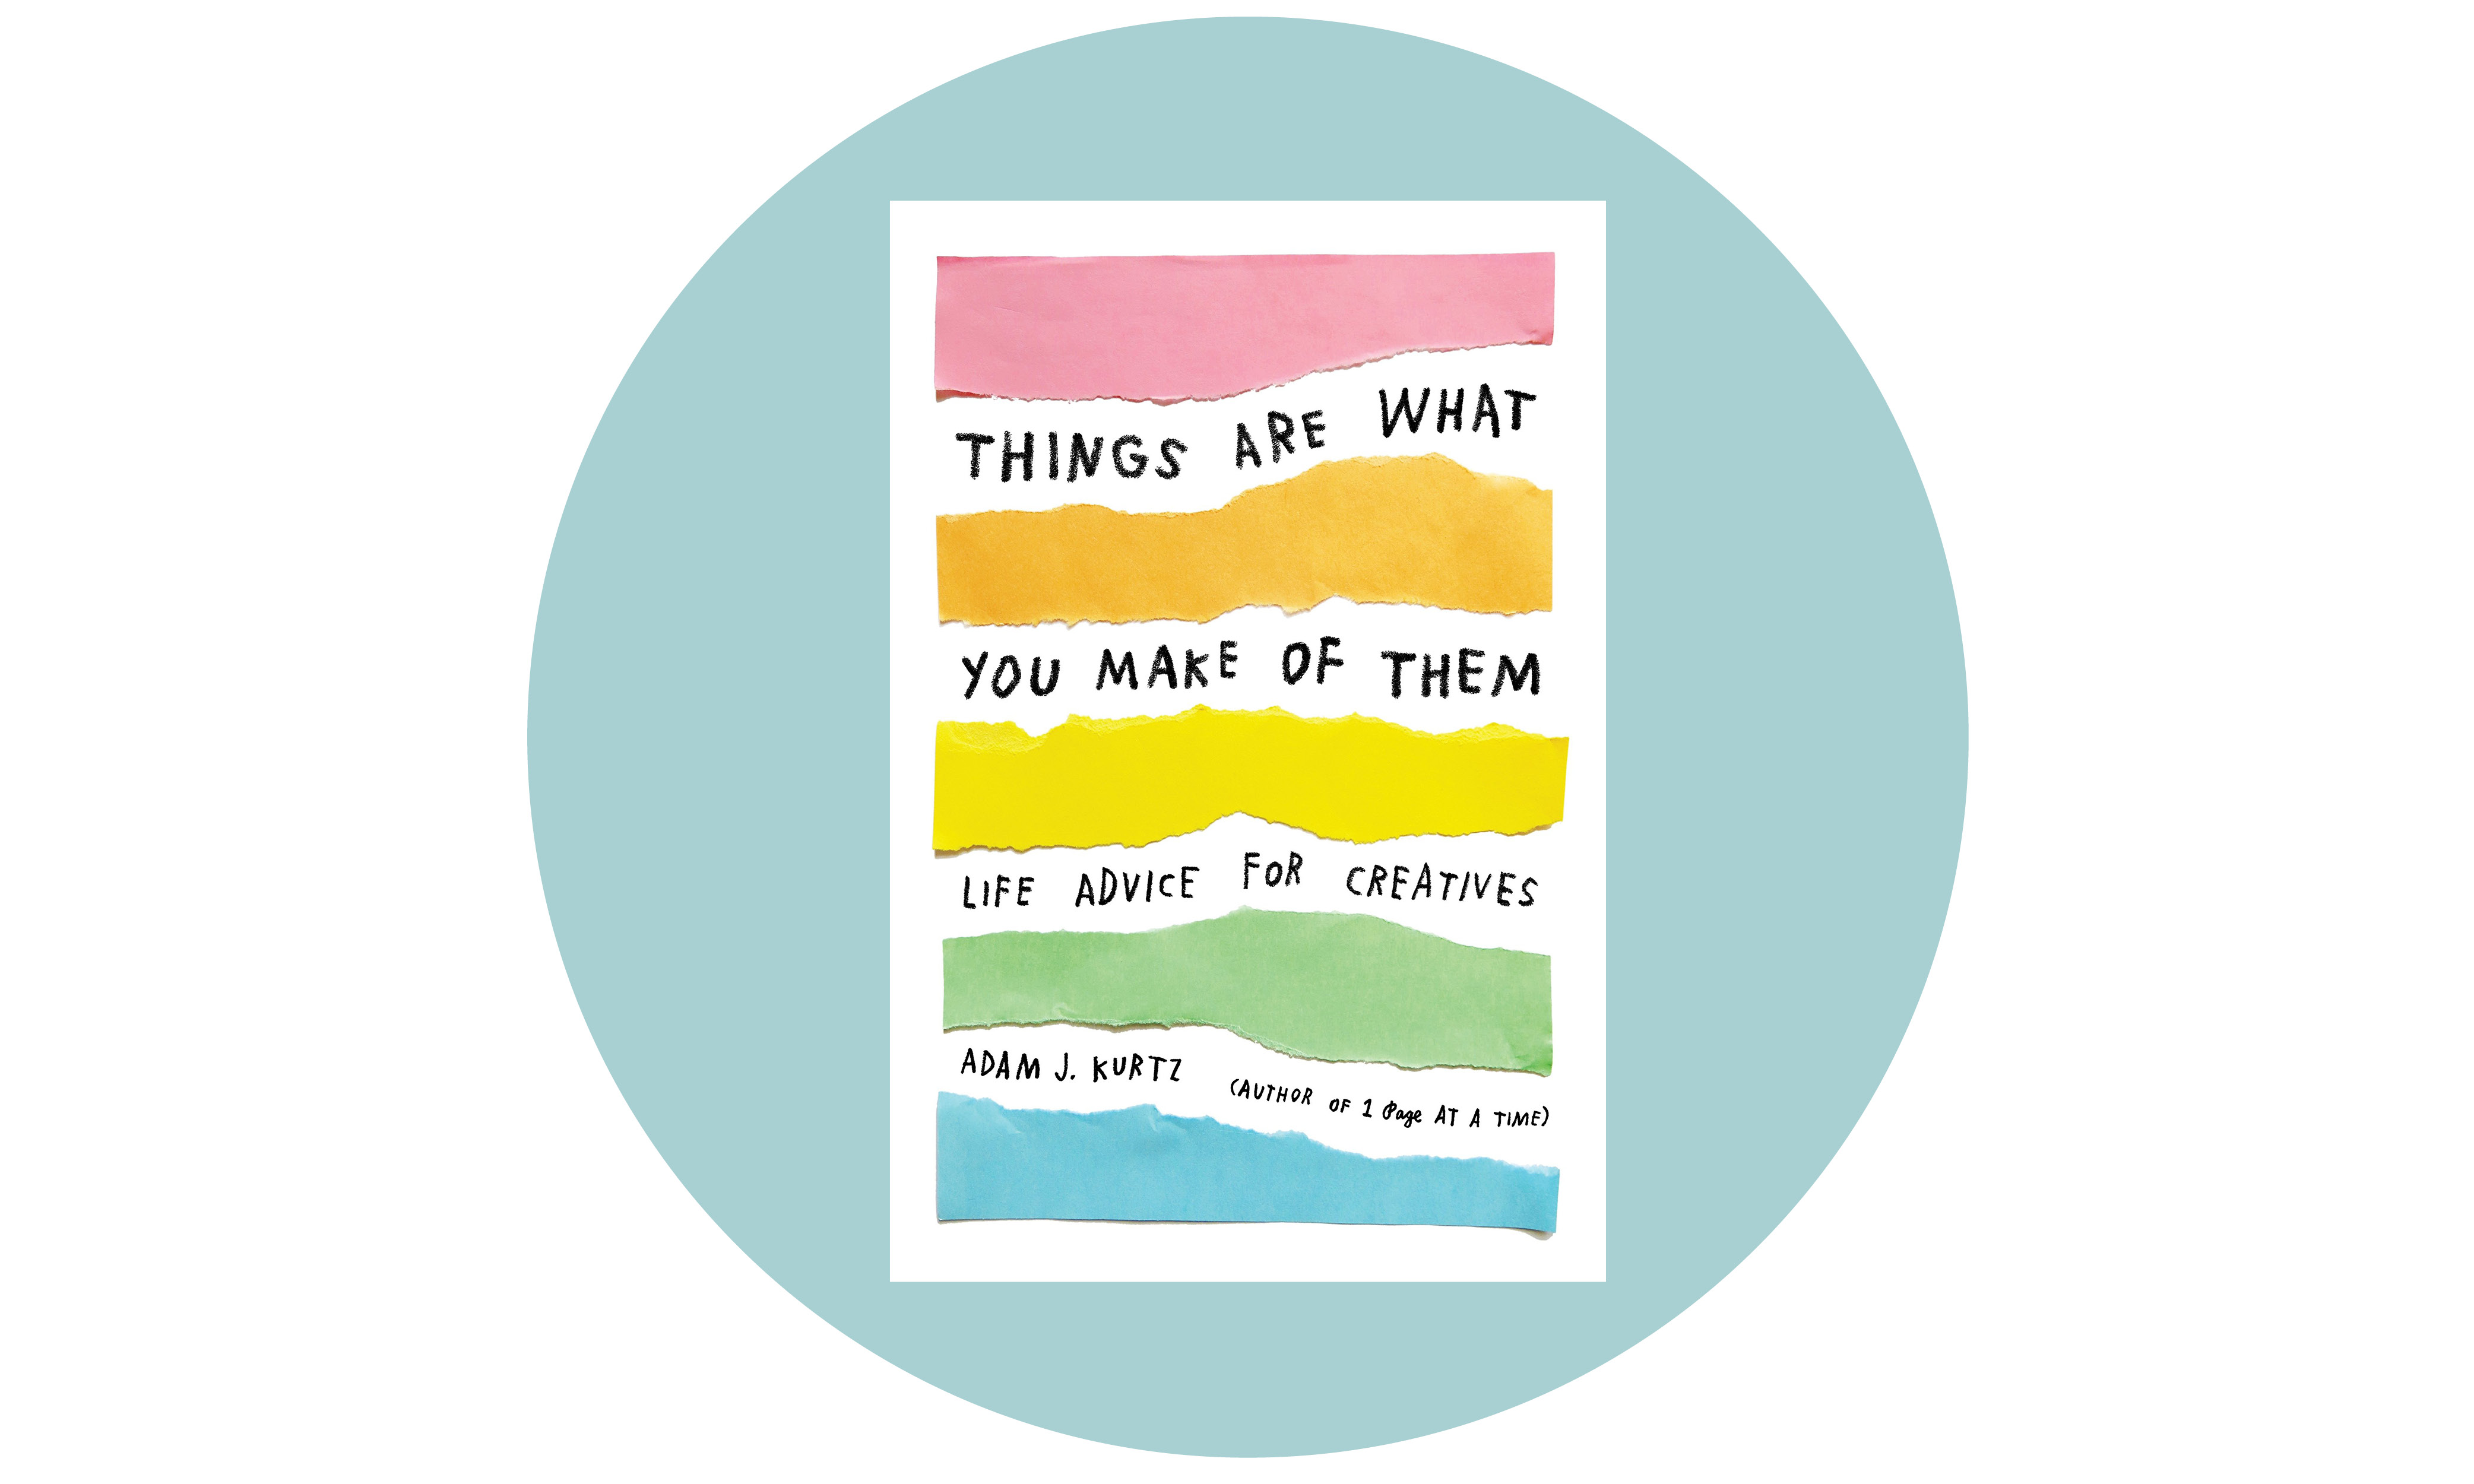 Things Are What You Make of Them: Life Advice for Creatives by Adam J Kurtz (Penguin Putnam, 2017) When a book designed to make you your most productive self includes a ‘how to get started’ list, the first item of which is simply ‘Blleerrghhh’ and a few items down suggests taking a nap, you know it knows its audience. That audience being not just those working in creative fields, but every person on the planet who does stuff for a living and sometimes finds it hard to do that stuff. Did we mention it’s handwritten with perforated pages that you can tear out and stick around your workspace? Pretty and smart.